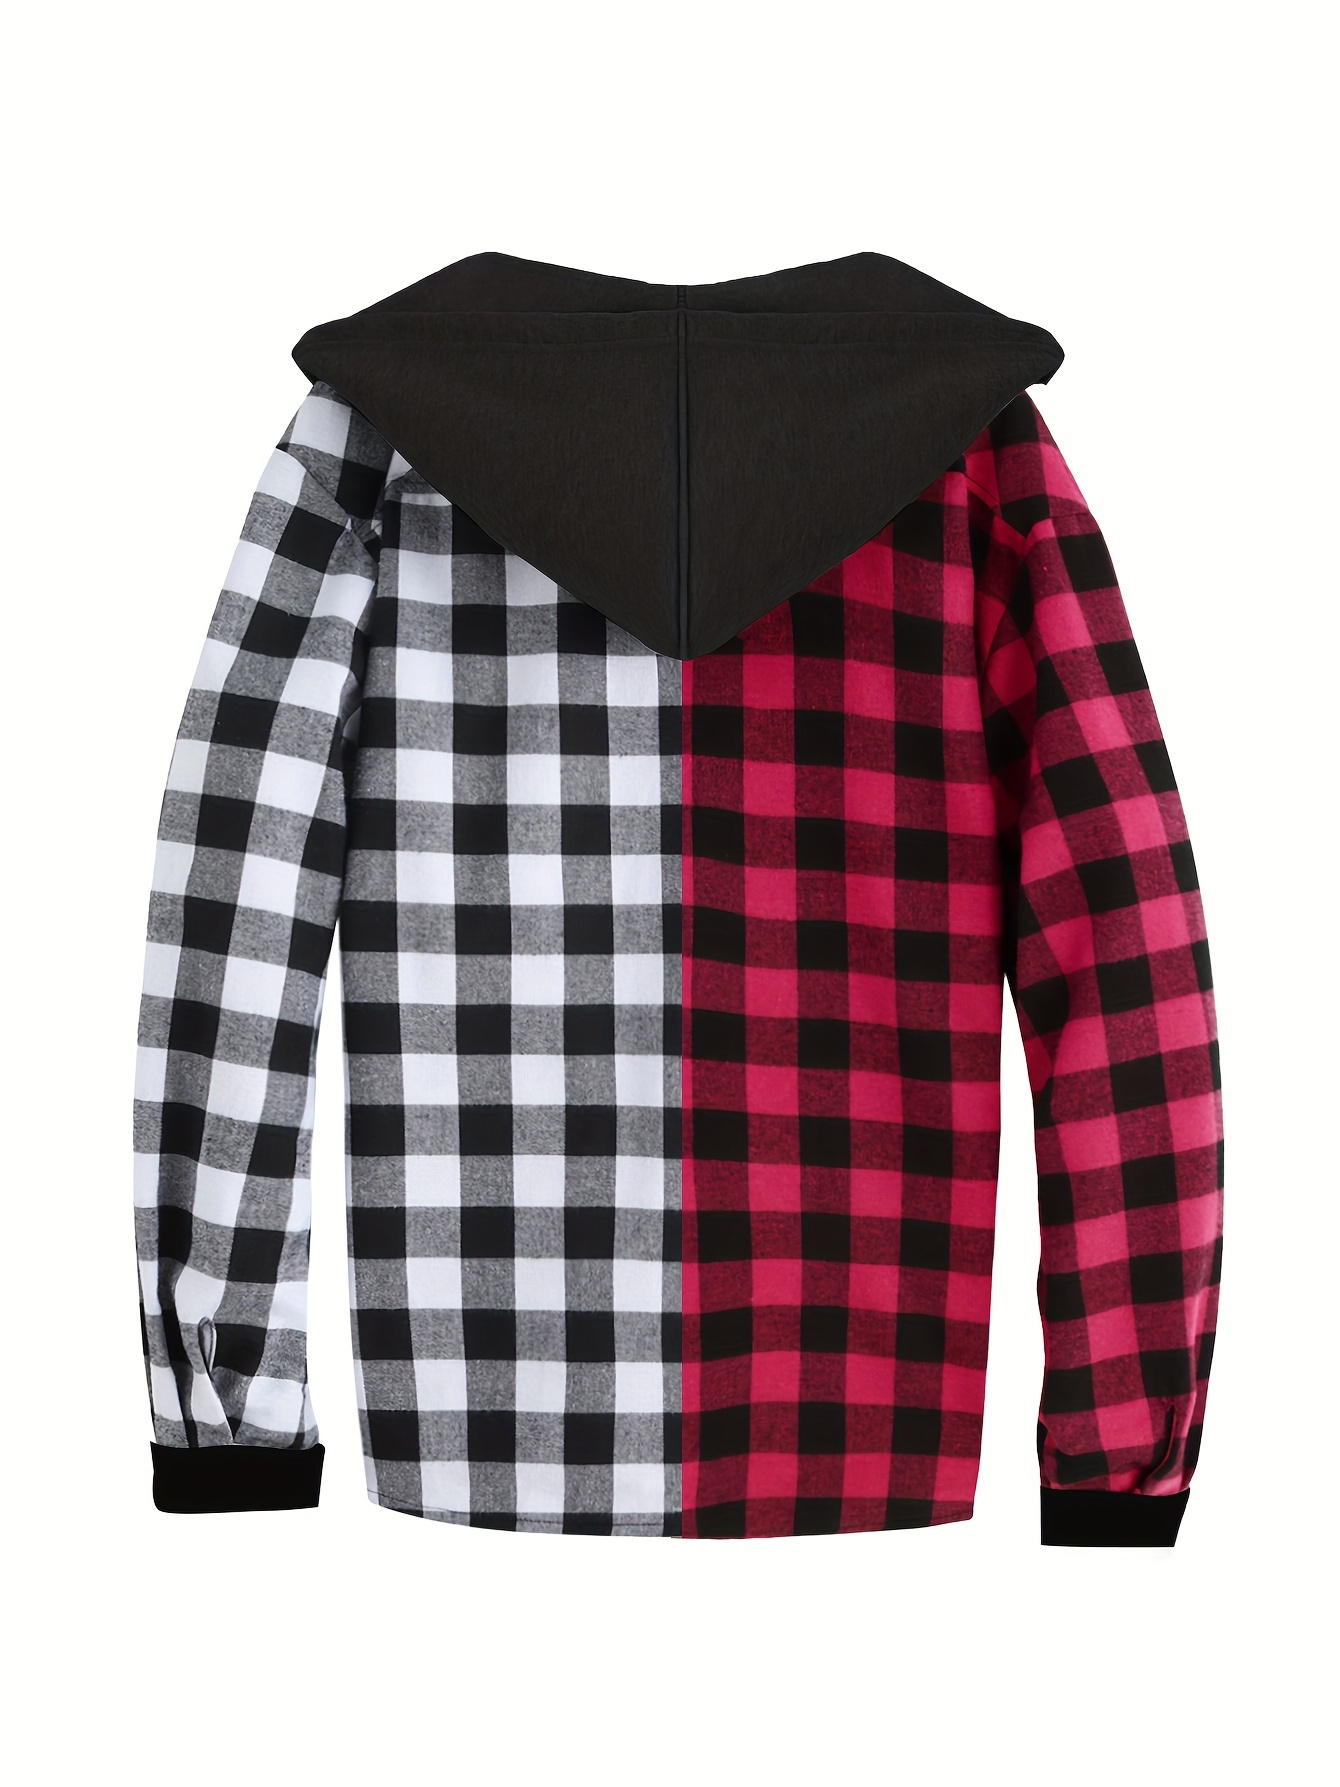 long sleeve casual regular fit button up hooded shirts jacket plaid shirt coat for men details 11